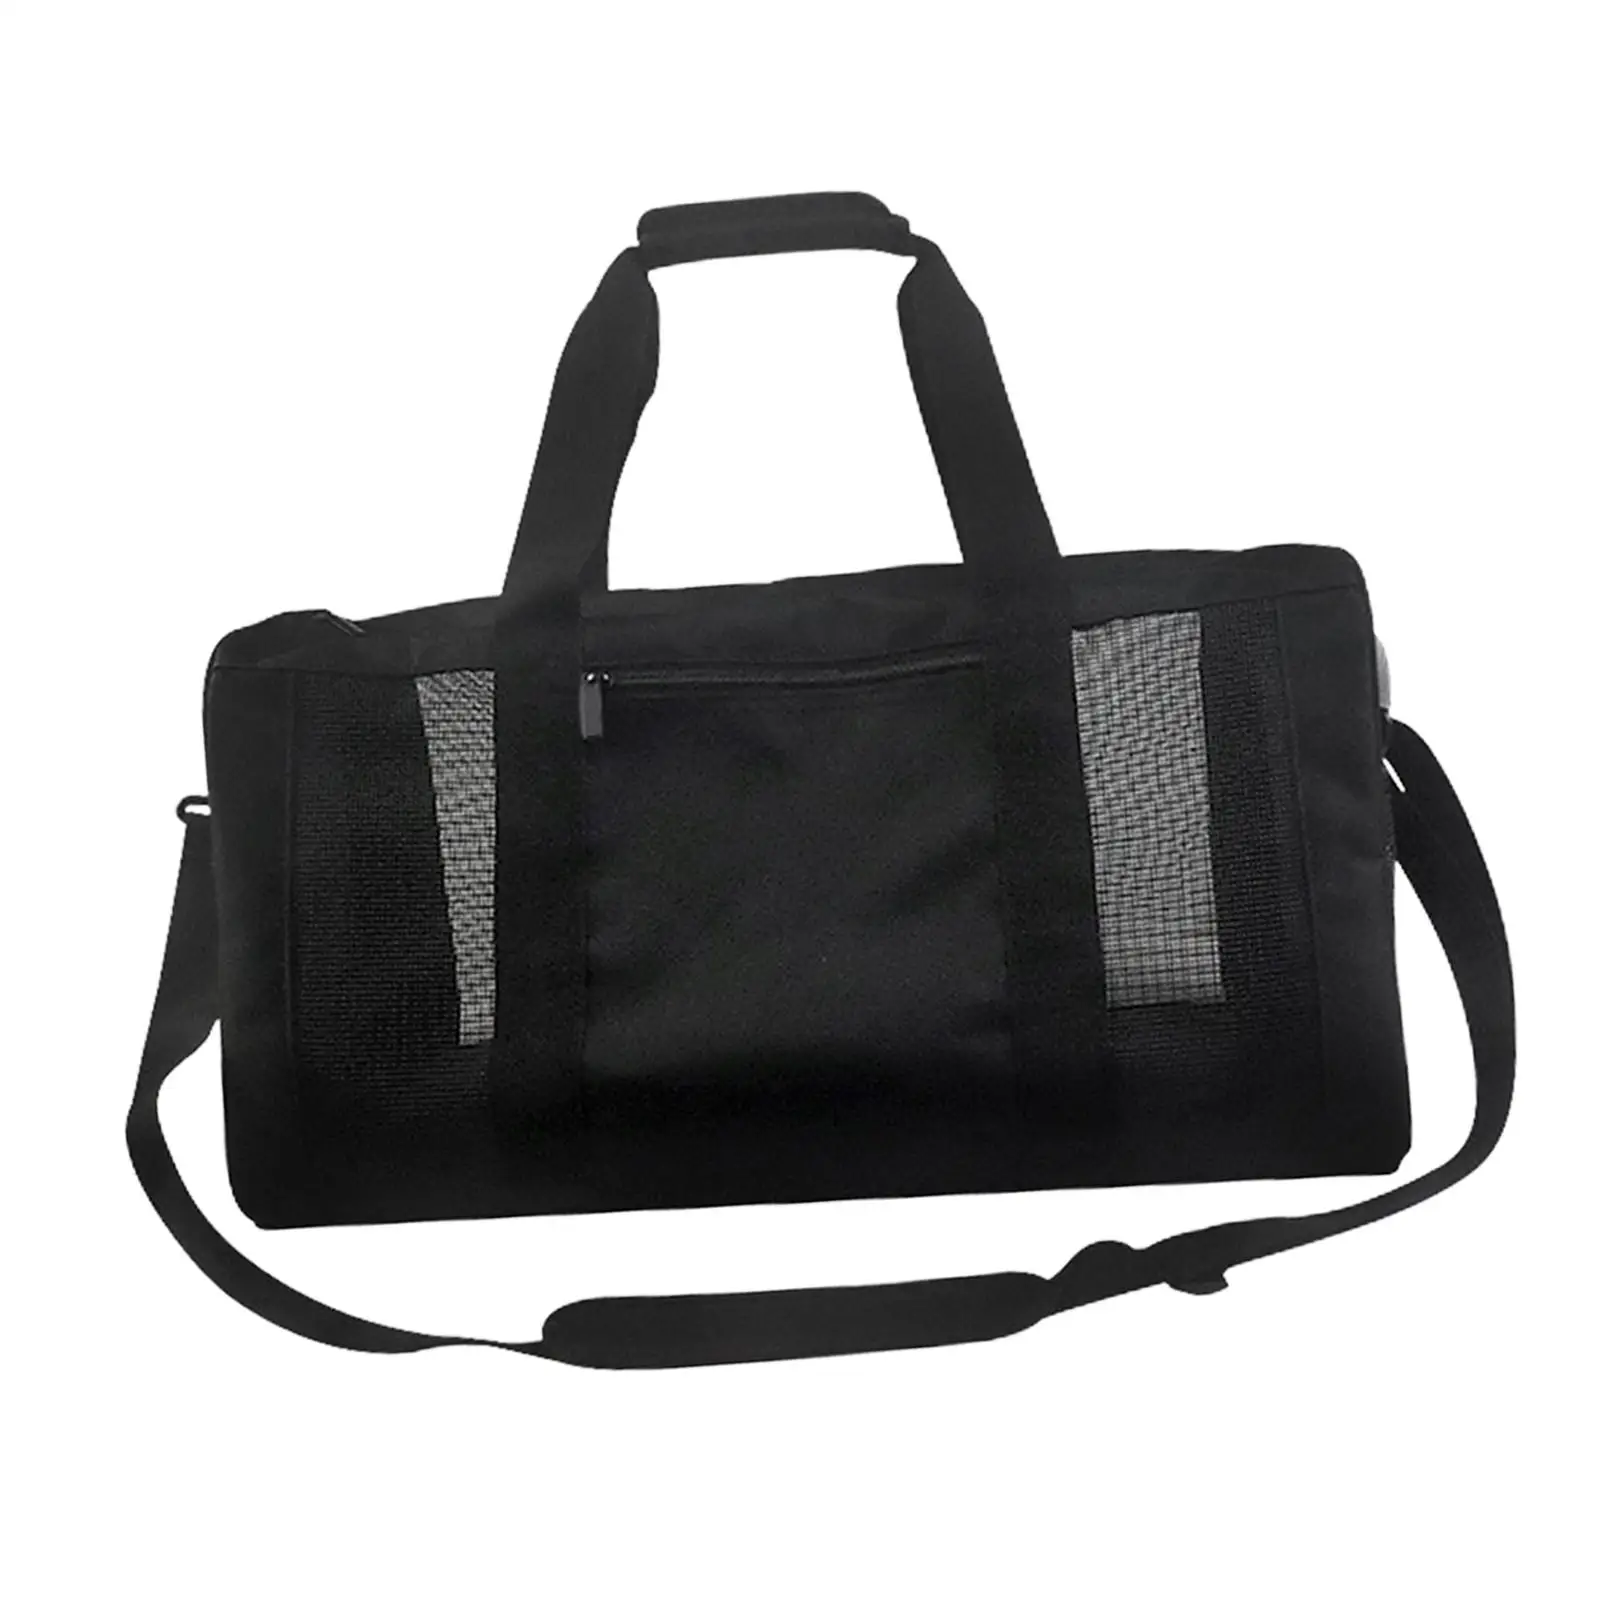 Mesh Gym Bag Zipper Closure Workout Gym Accessories Easy Dry Detachable Strap Multifunctional Outdoor Exercise Bag Sports Bags